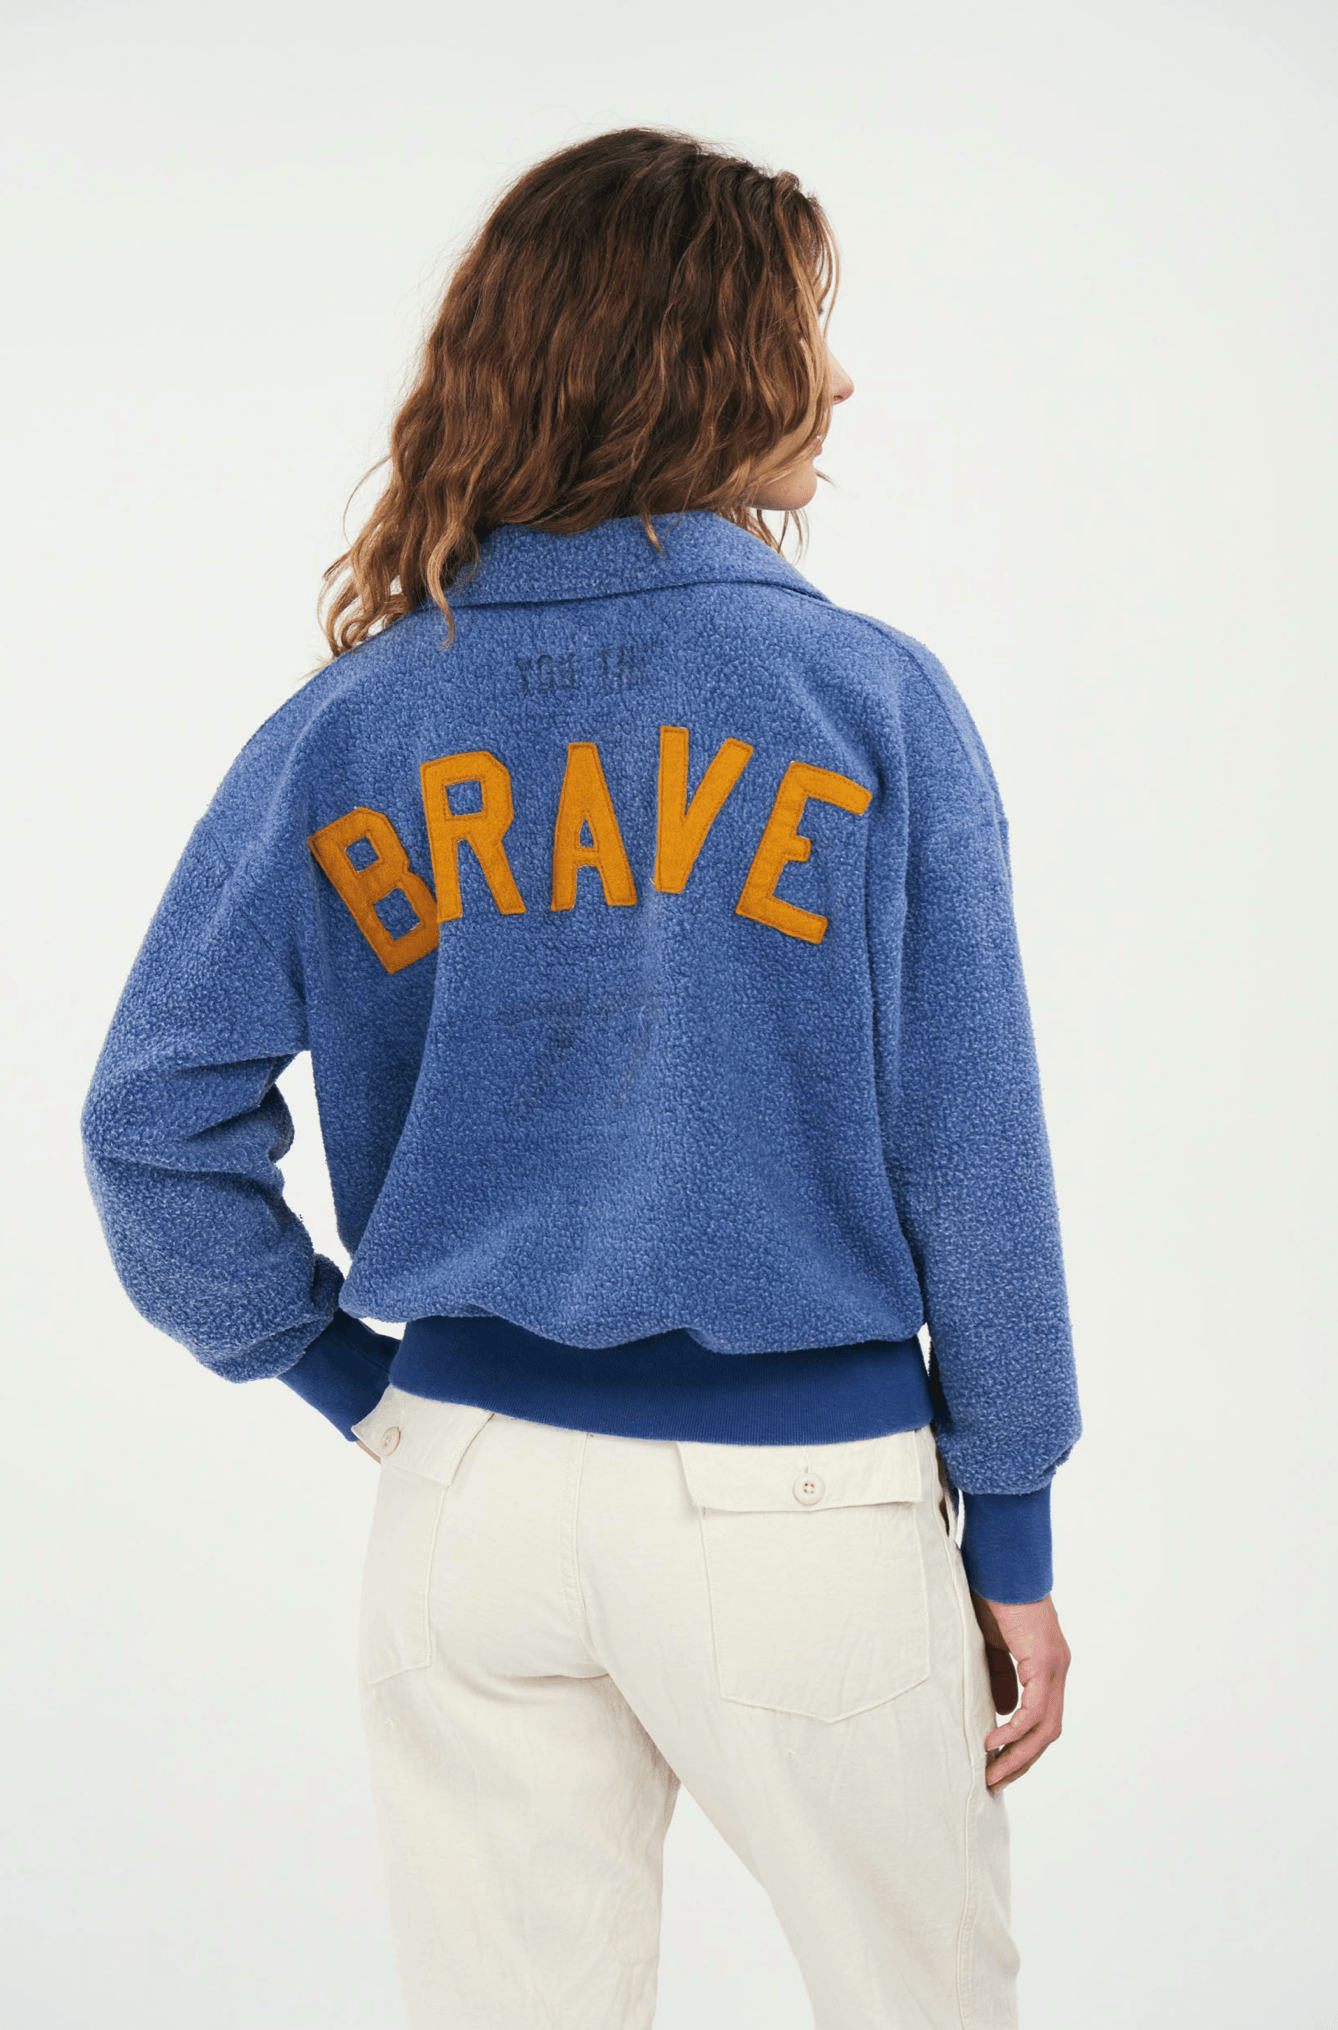 3 Button Collared Sweat "BRAVE" - youthebrave